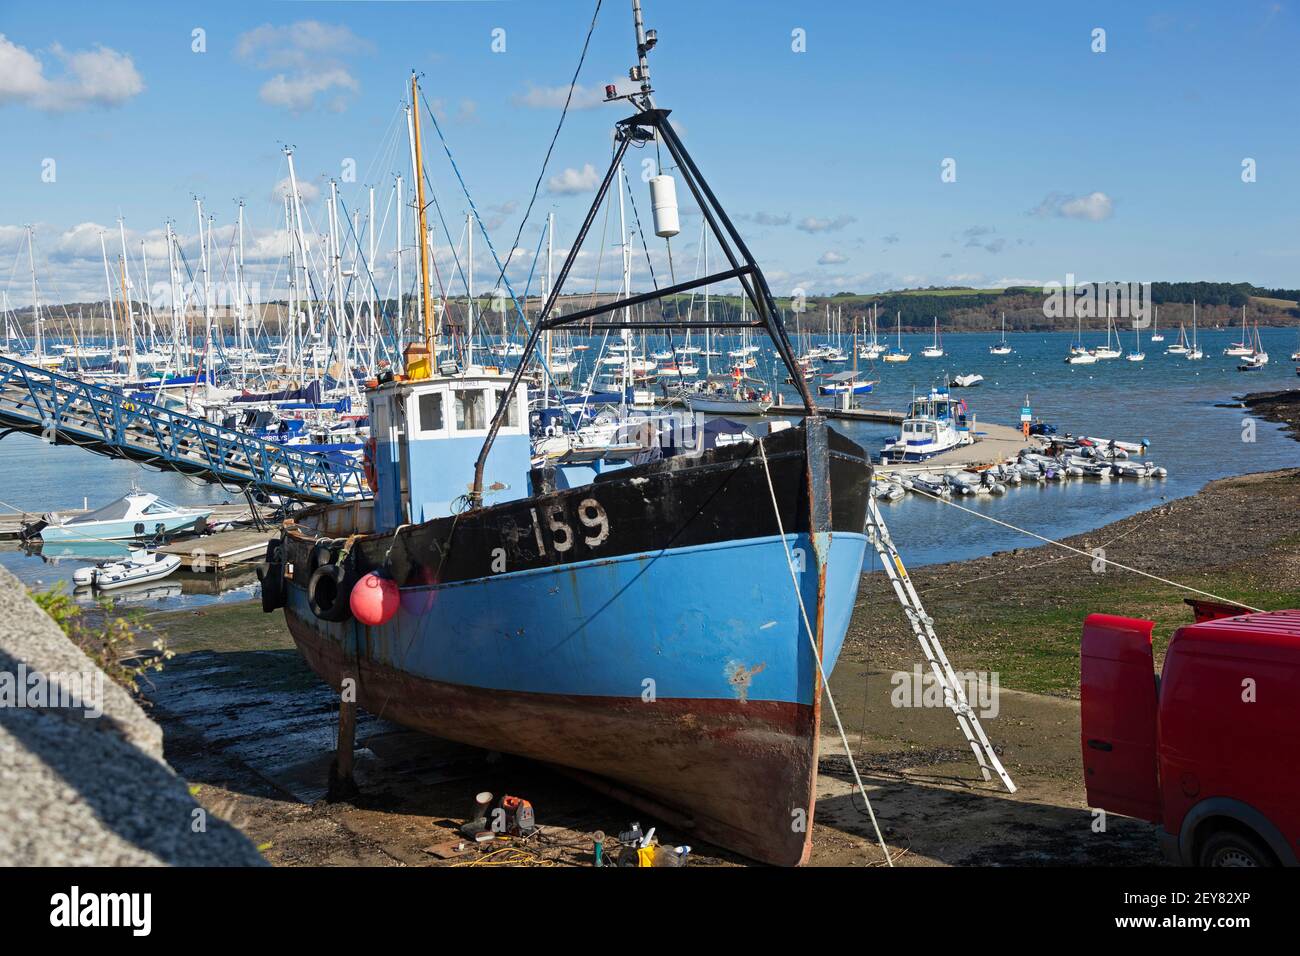 A trawler being maintained on a slipway at low tide, Mylor Yatch Harbour near Penryn and Falmouth, Cornwall ,UK Stock Photo